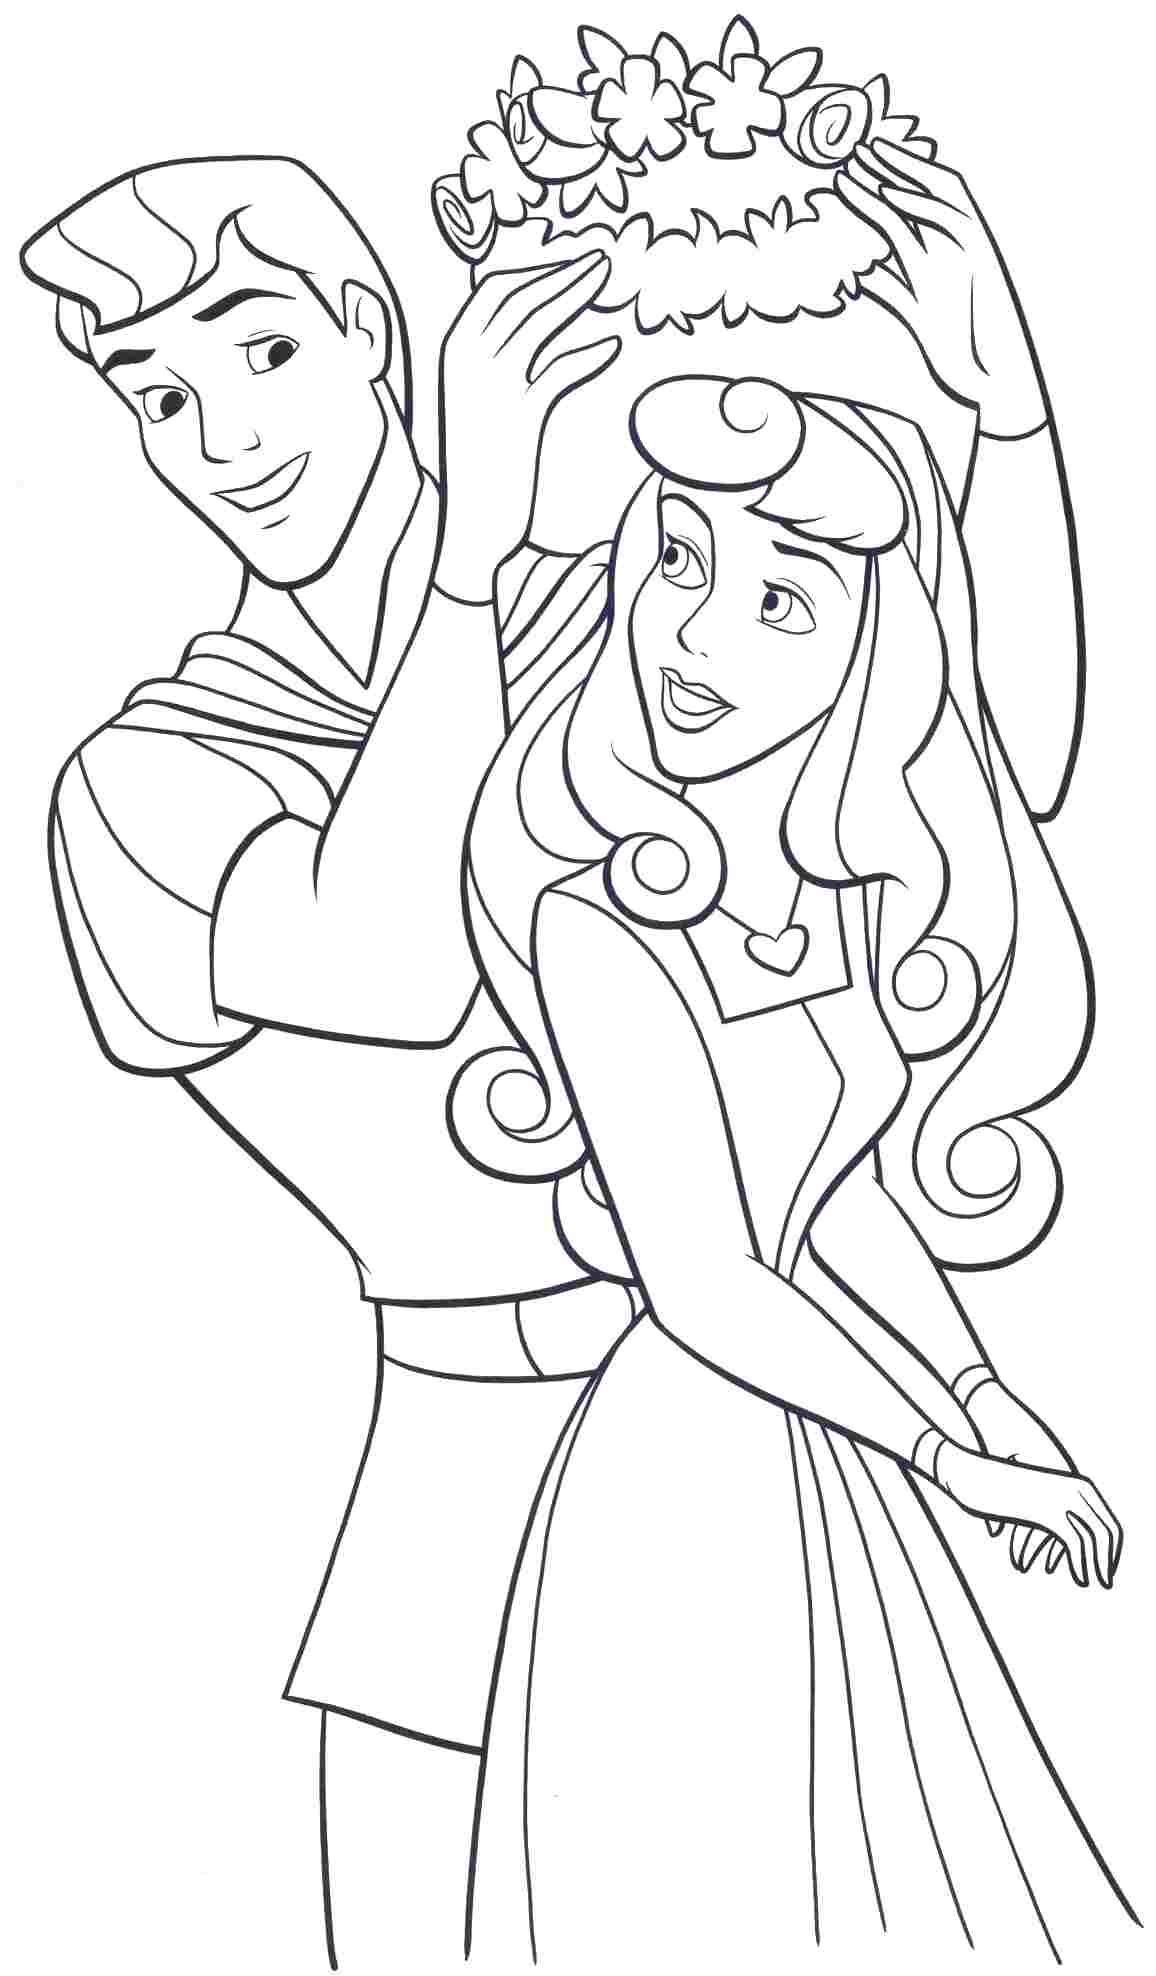 Download Free Printable Sleeping Beauty Coloring Pages For Kids